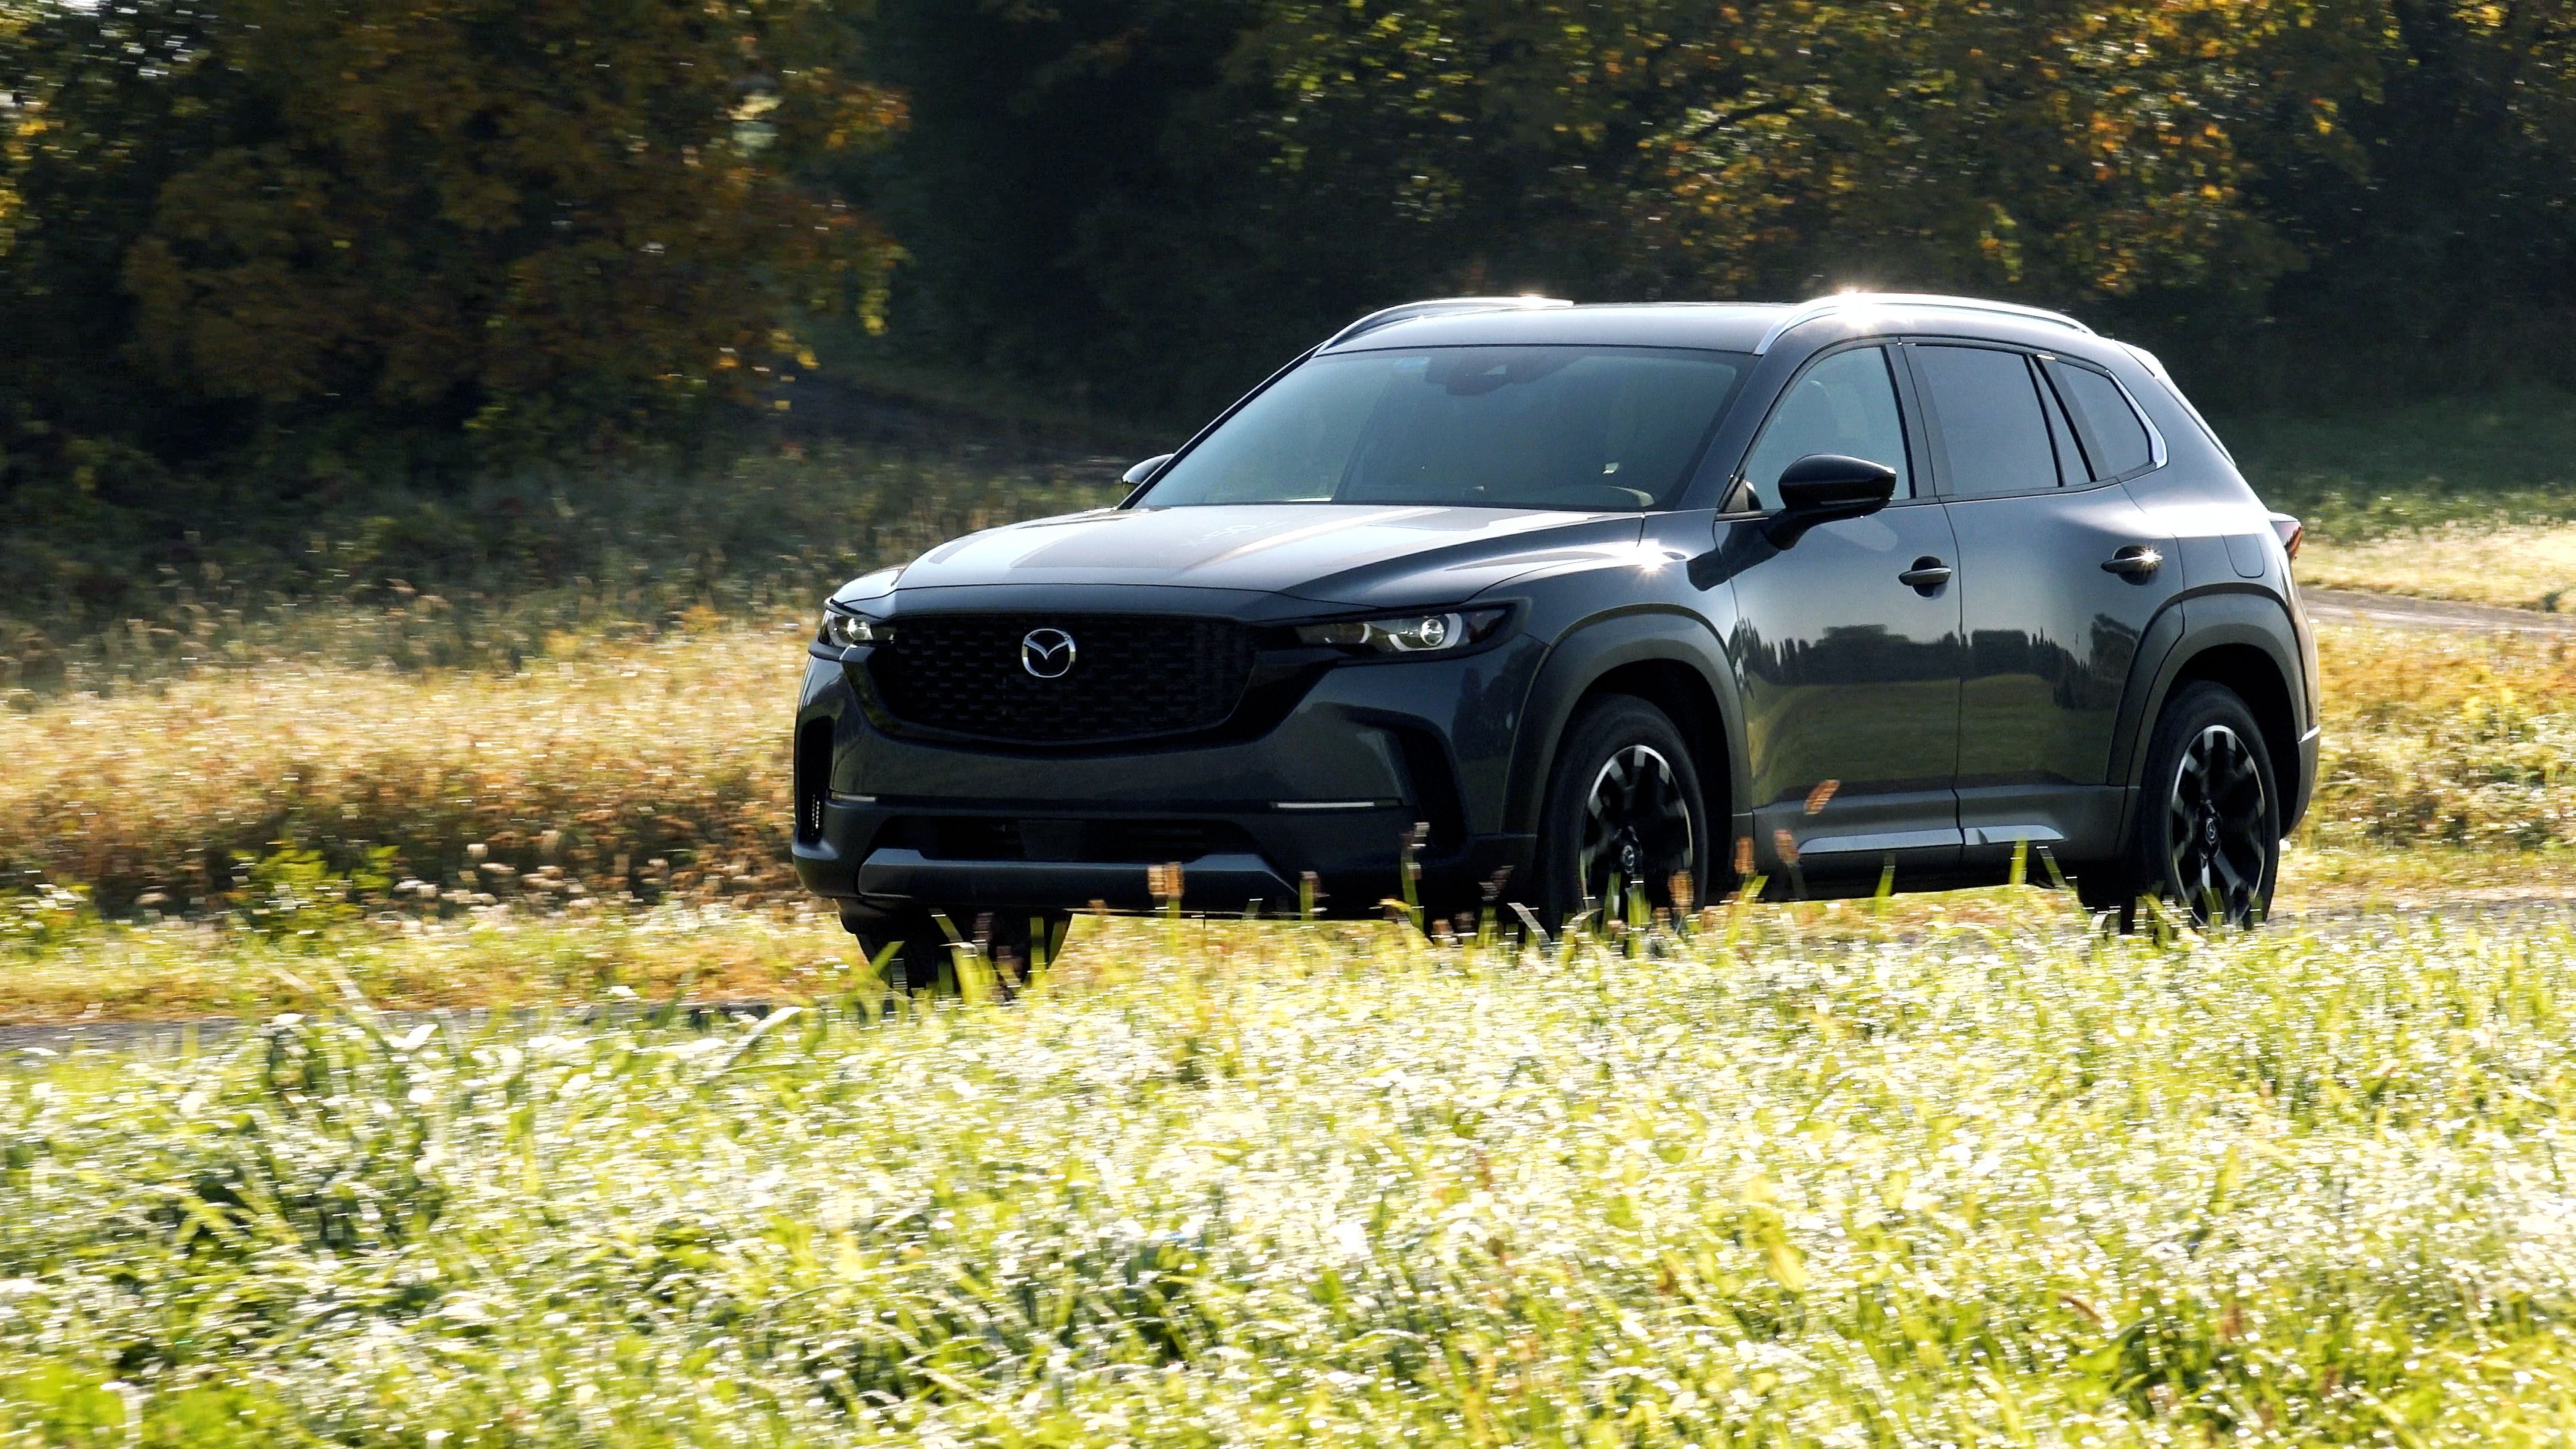 2023 Mazda Cx 50 Meridian Edition Review The Brands Most Rugged Suv